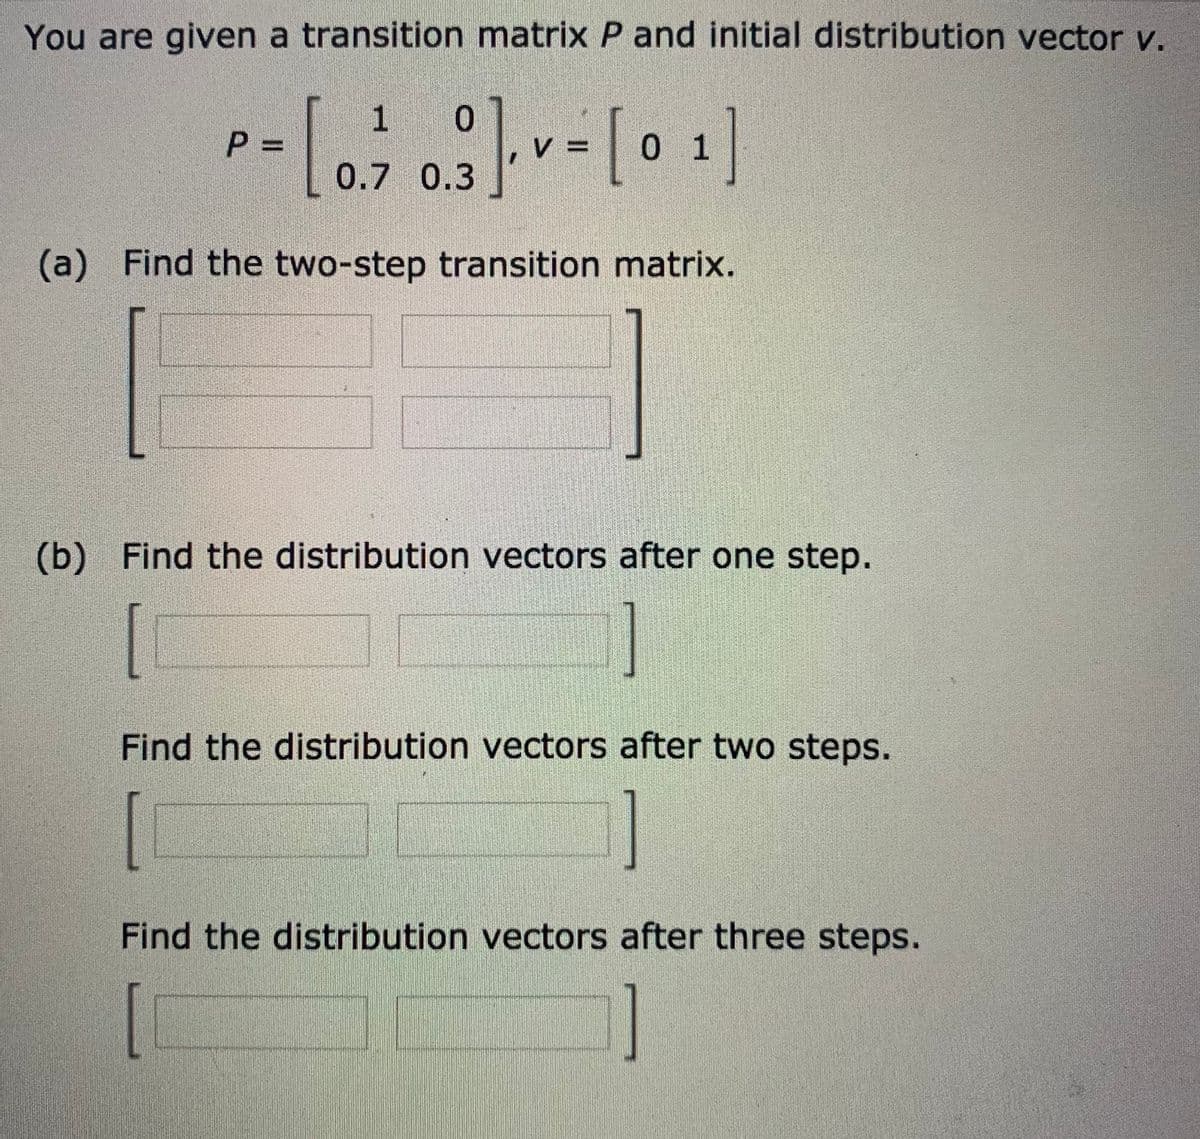 You are given a transition matrix P and initial distribution vector v.
1 0
0 1
0.7 0.3
(a) Find the two-step transition matrix.
(b) Find the distribution vectors after one step.
Find the distribution vectors after two steps.
[
Find the distribution vectors after three steps.
